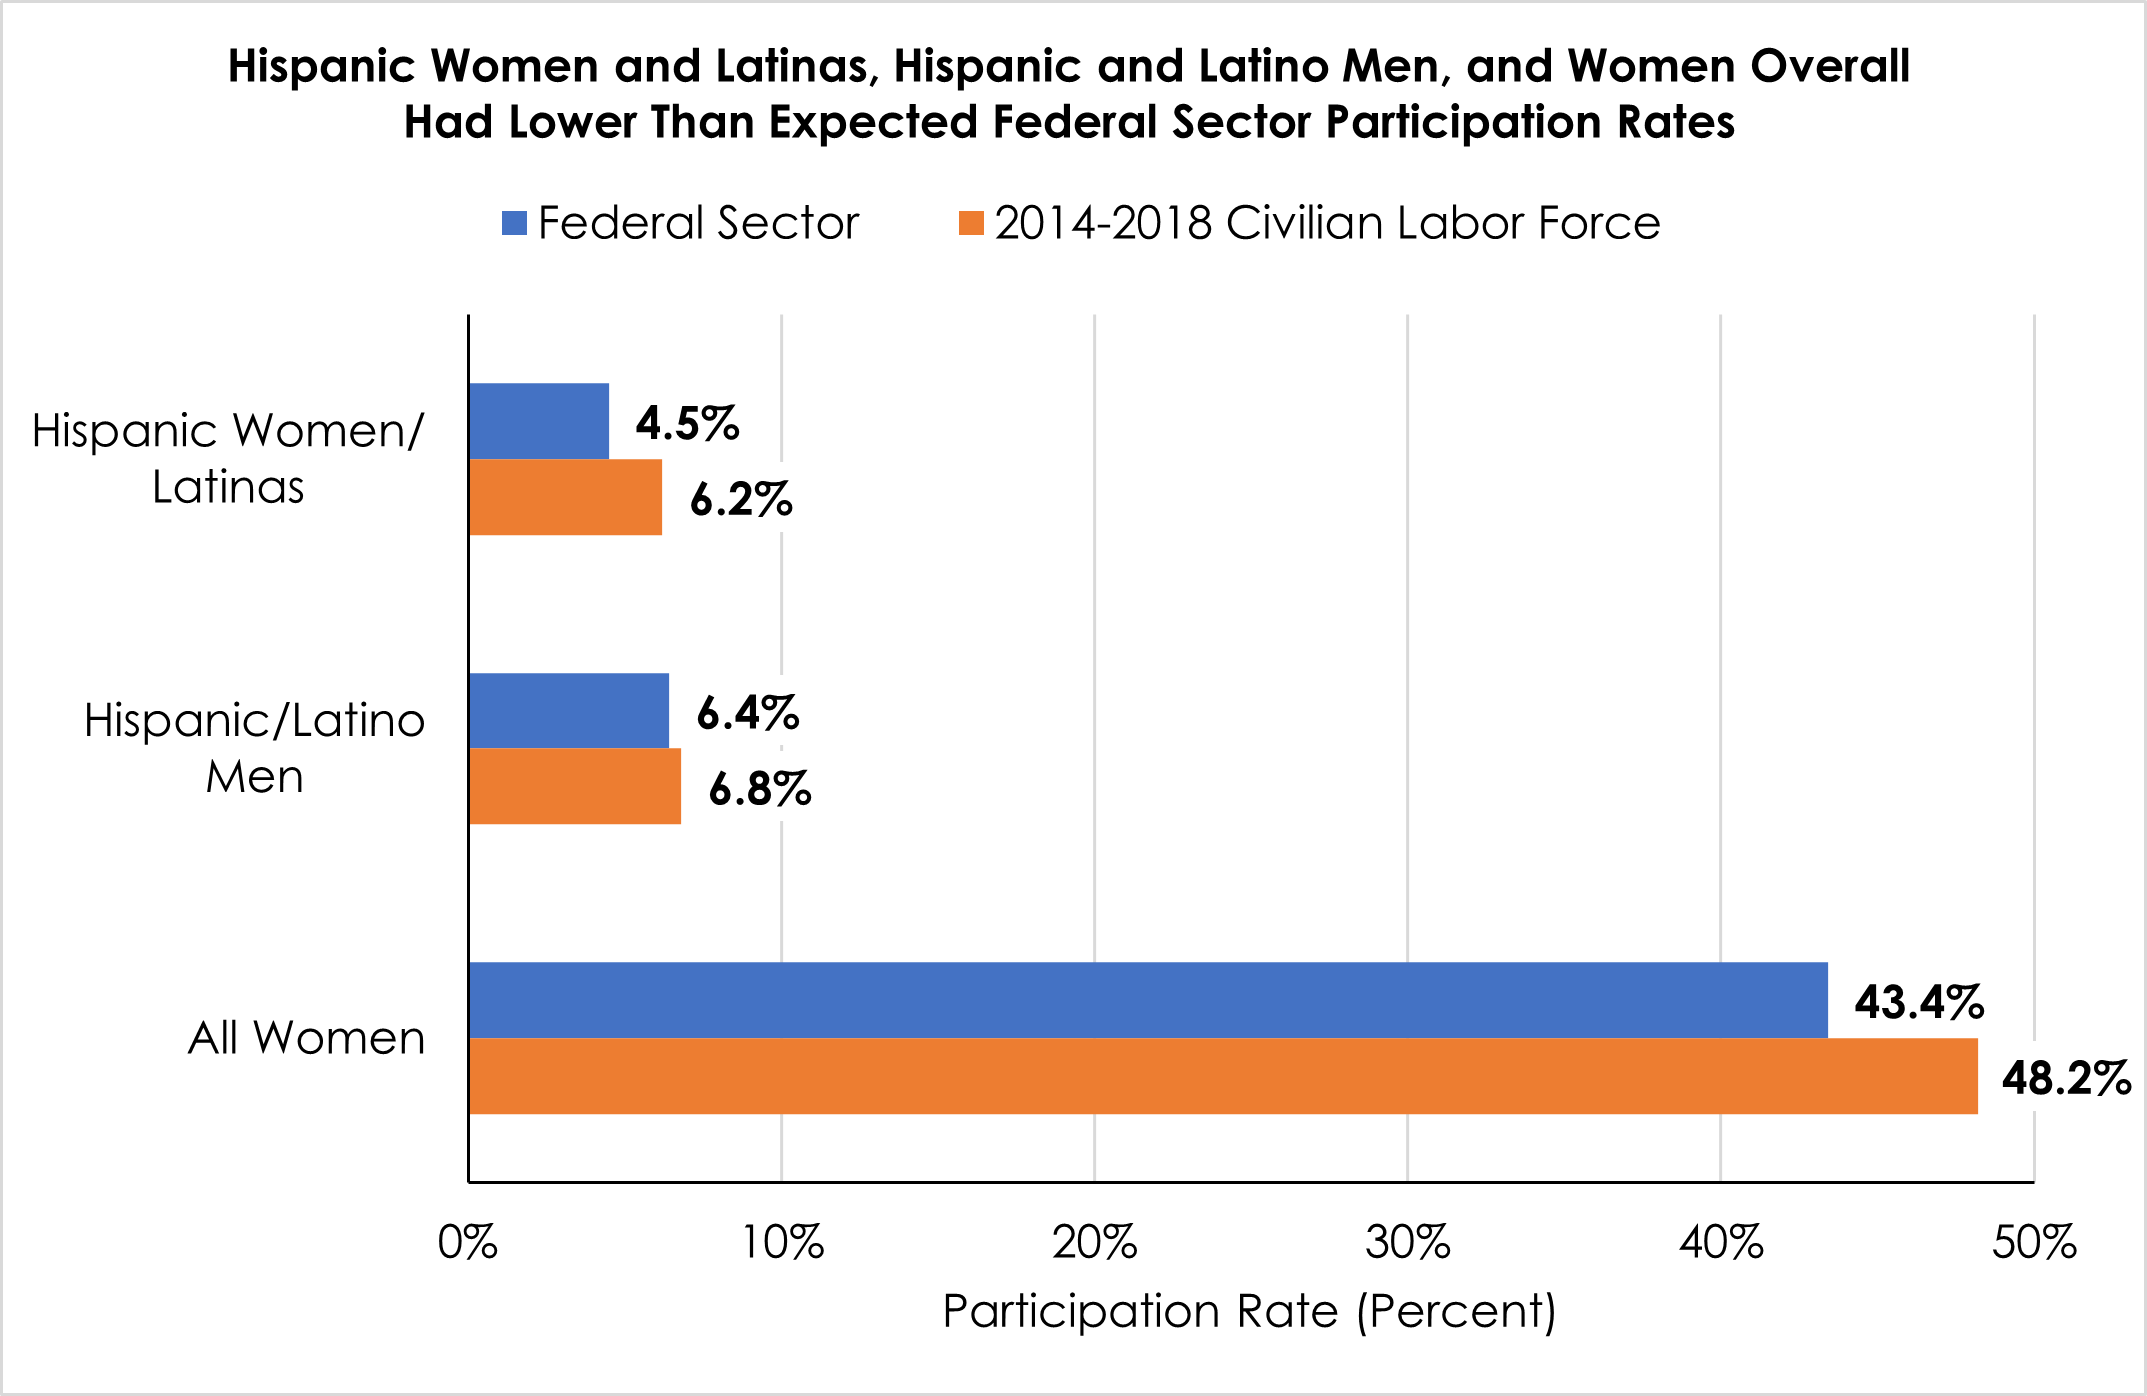 Figure shows that Hispanic and Latina women, Hispanic and Latino men, and women overall had lower than expected Federal sector participation rates in fiscal year 2020.  6.2% Hispanic/Latina Women in the Civilian Labor Force.  6.8% Hispanic/Latino Men in the Civilian Labor Force.  48.2% Women in the Civilian Labor Force.  4.5% Hispanic/Latina Women in the Federal Service.  6.4% Hispanic/Latino Men in the Federal Service.  43.4% Men in the Federal Service